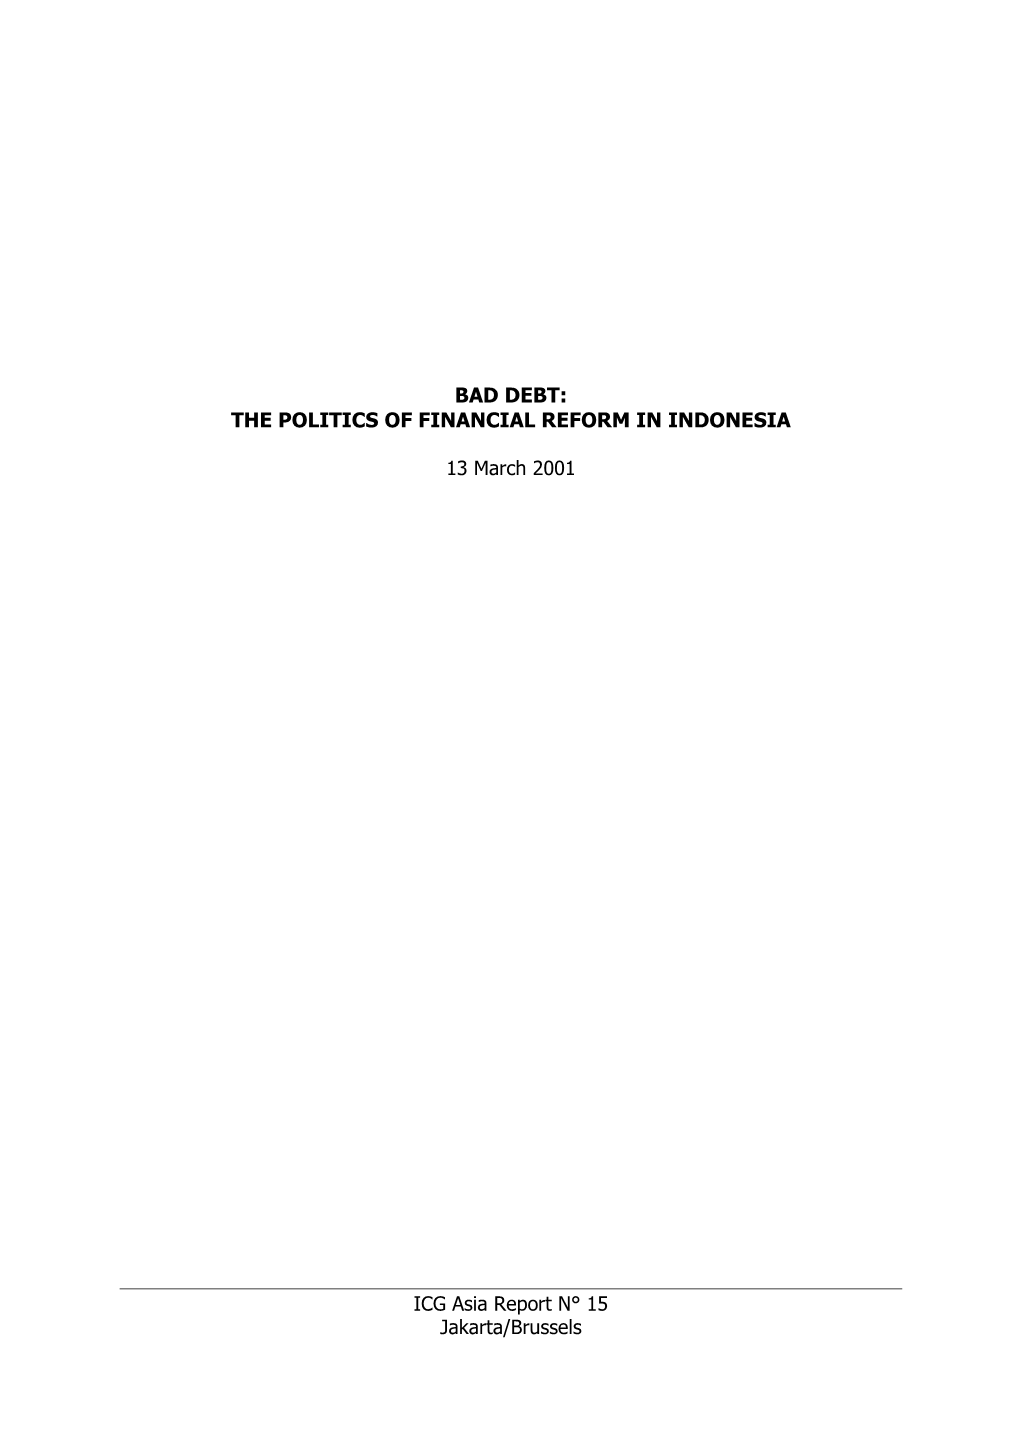 Bad Debt: the Politics of Financial Reform in Indonesia